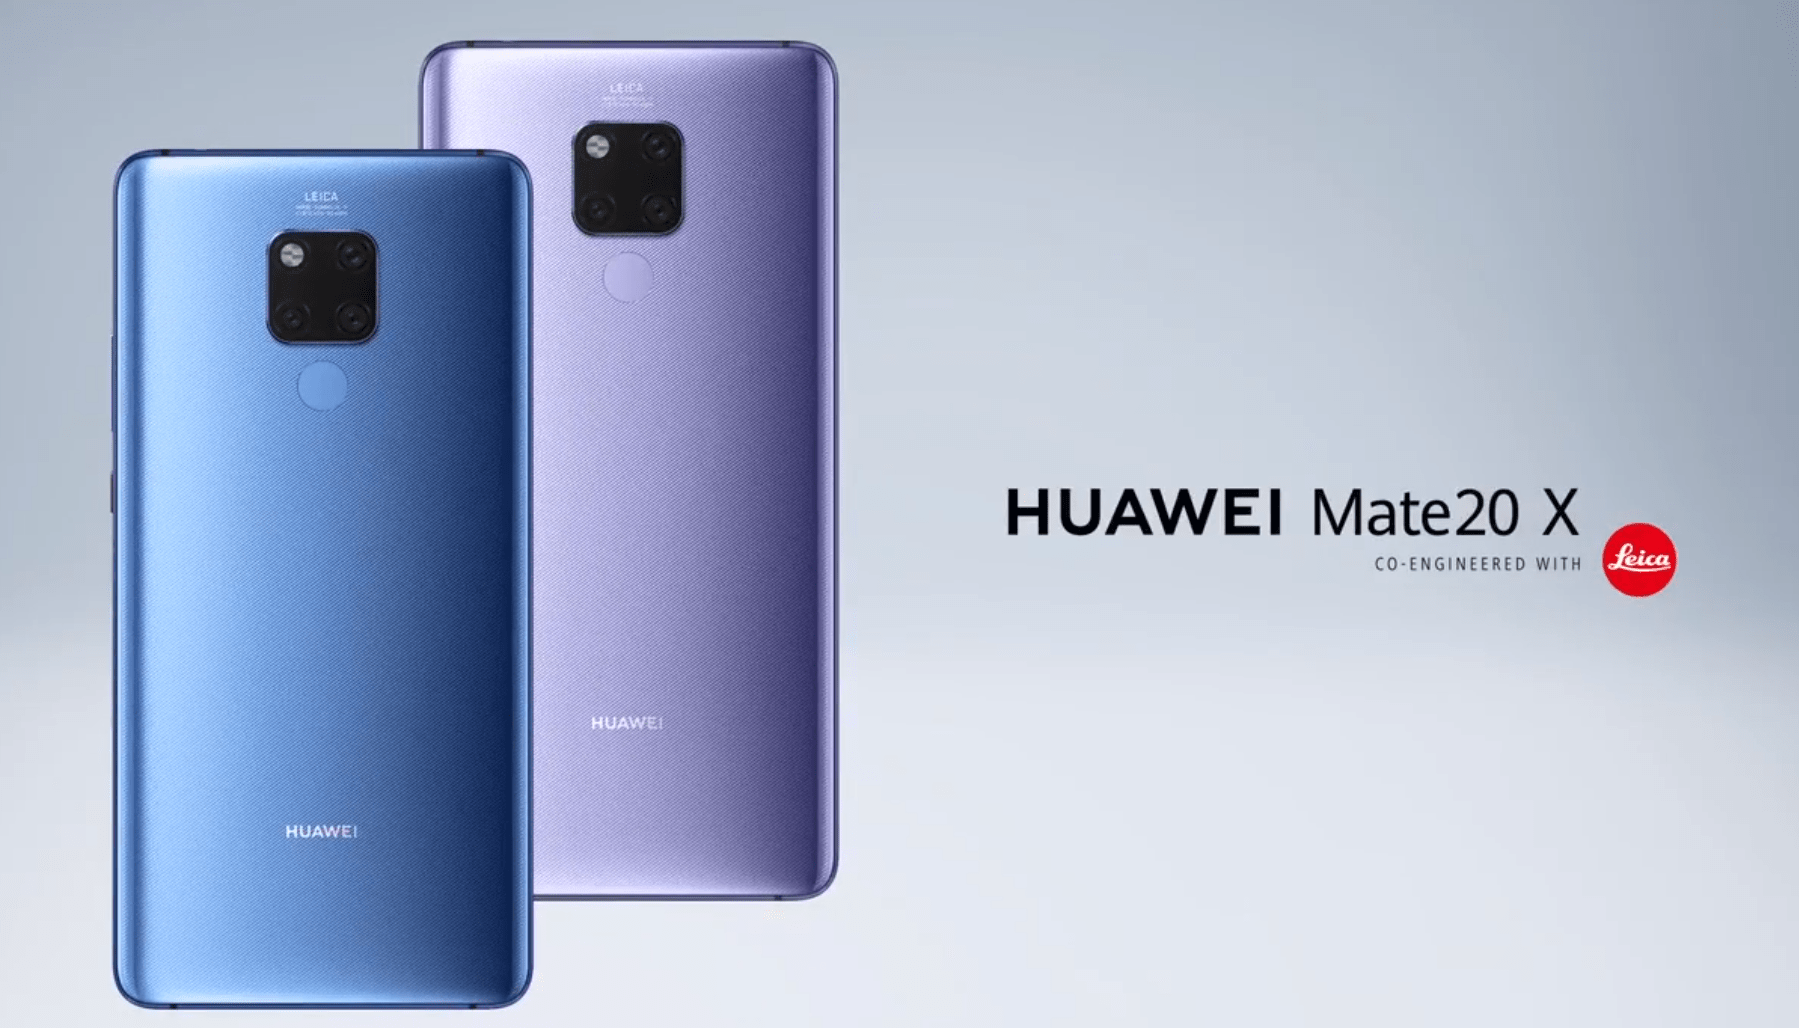 Huawei Mate 20 X now available in Taiwan - Huawei Central